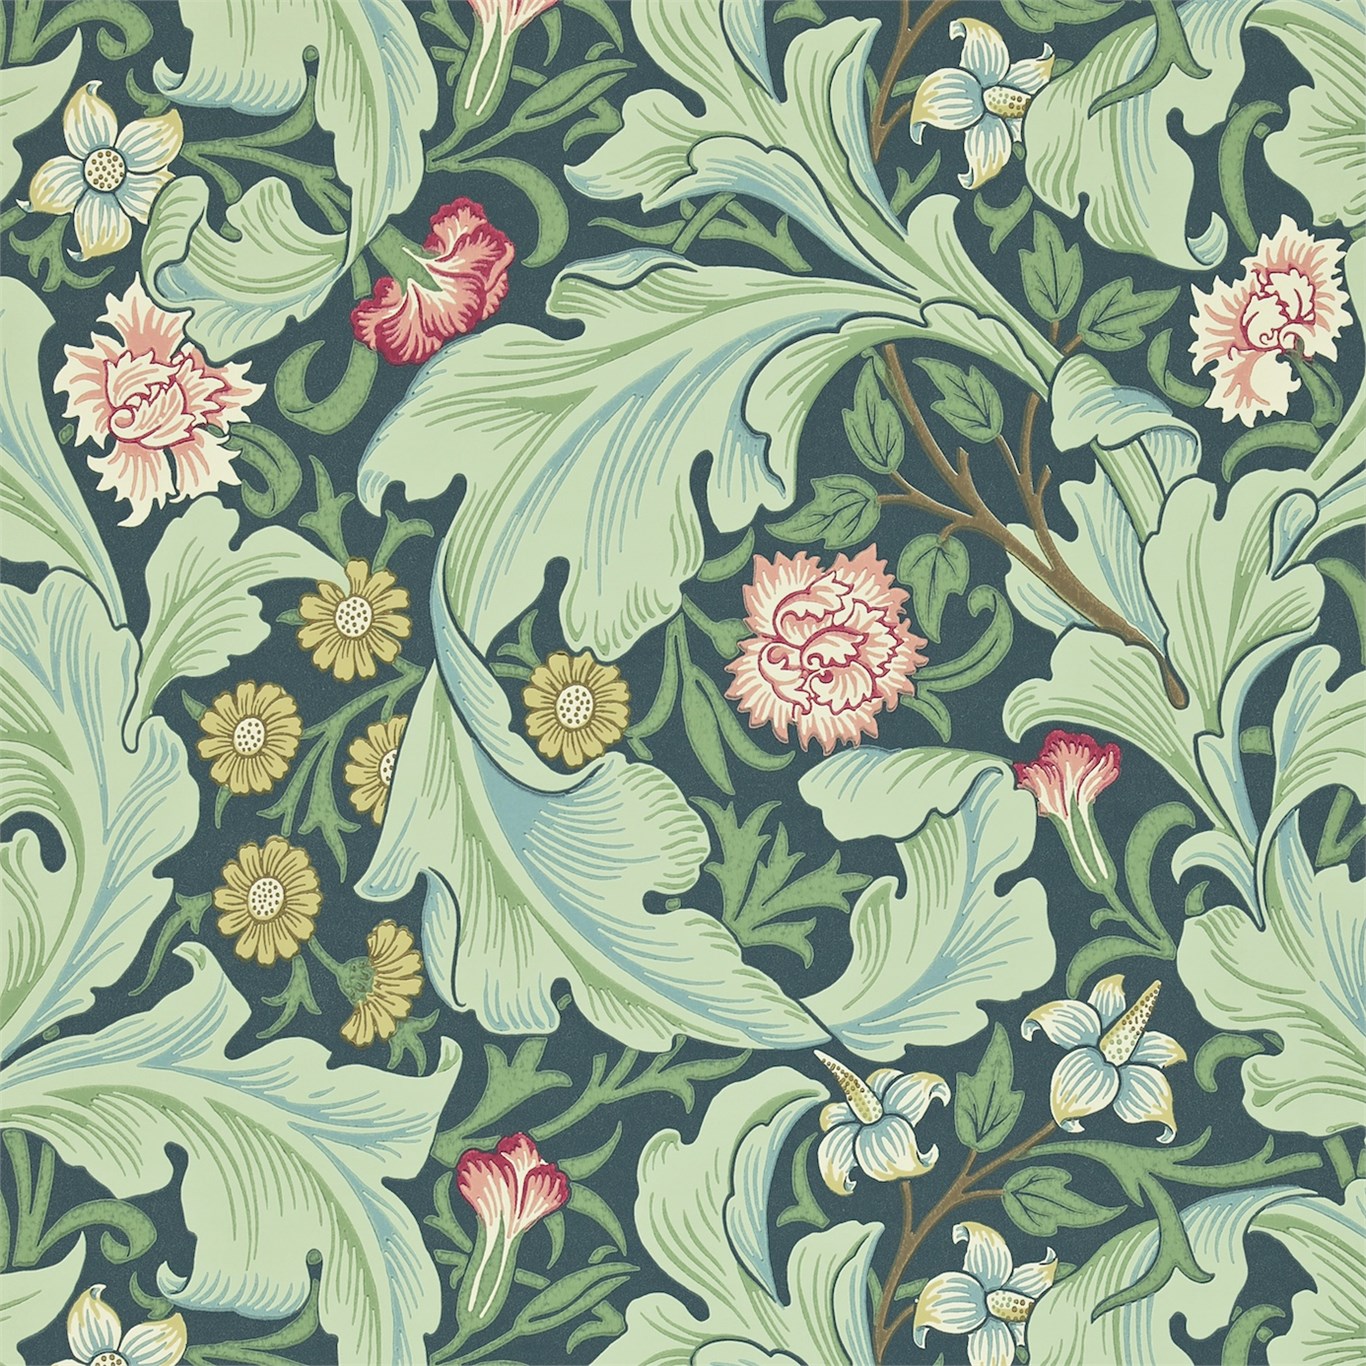 Leicester, A Wallpaper By Morris & Co - Leicester Wallpaper William Morris  - 1366x1366 Wallpaper 